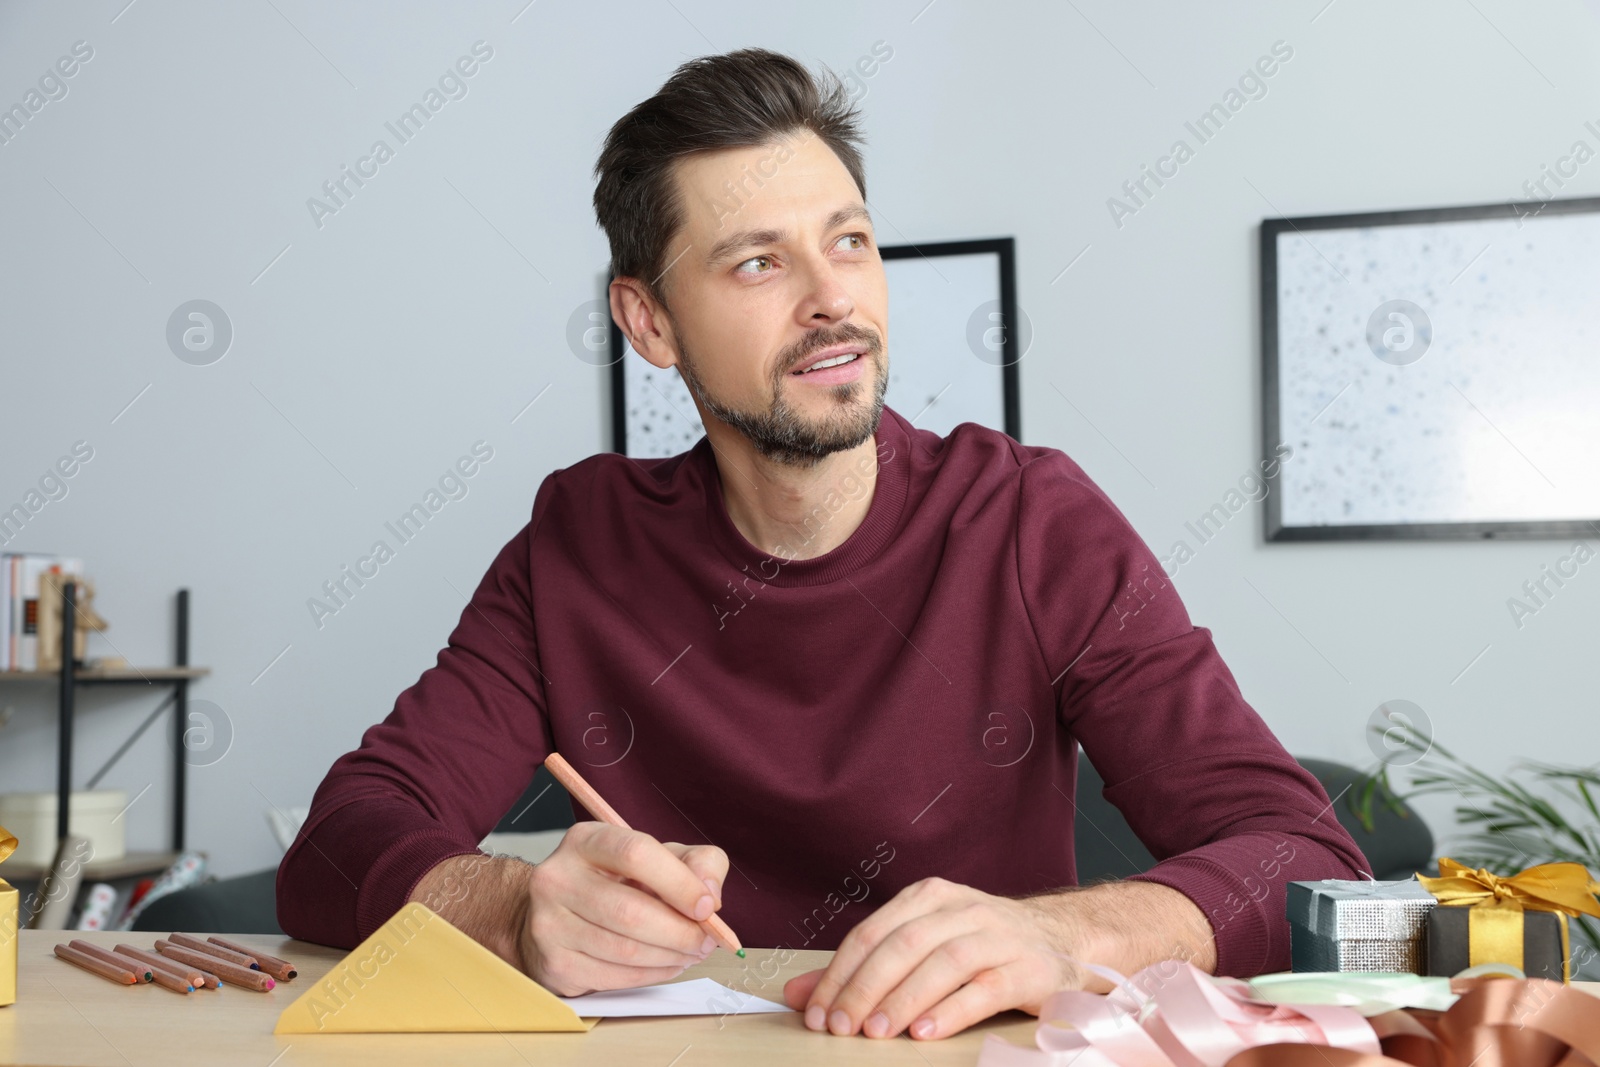 Photo of Man writing message in greeting card at wooden table in room